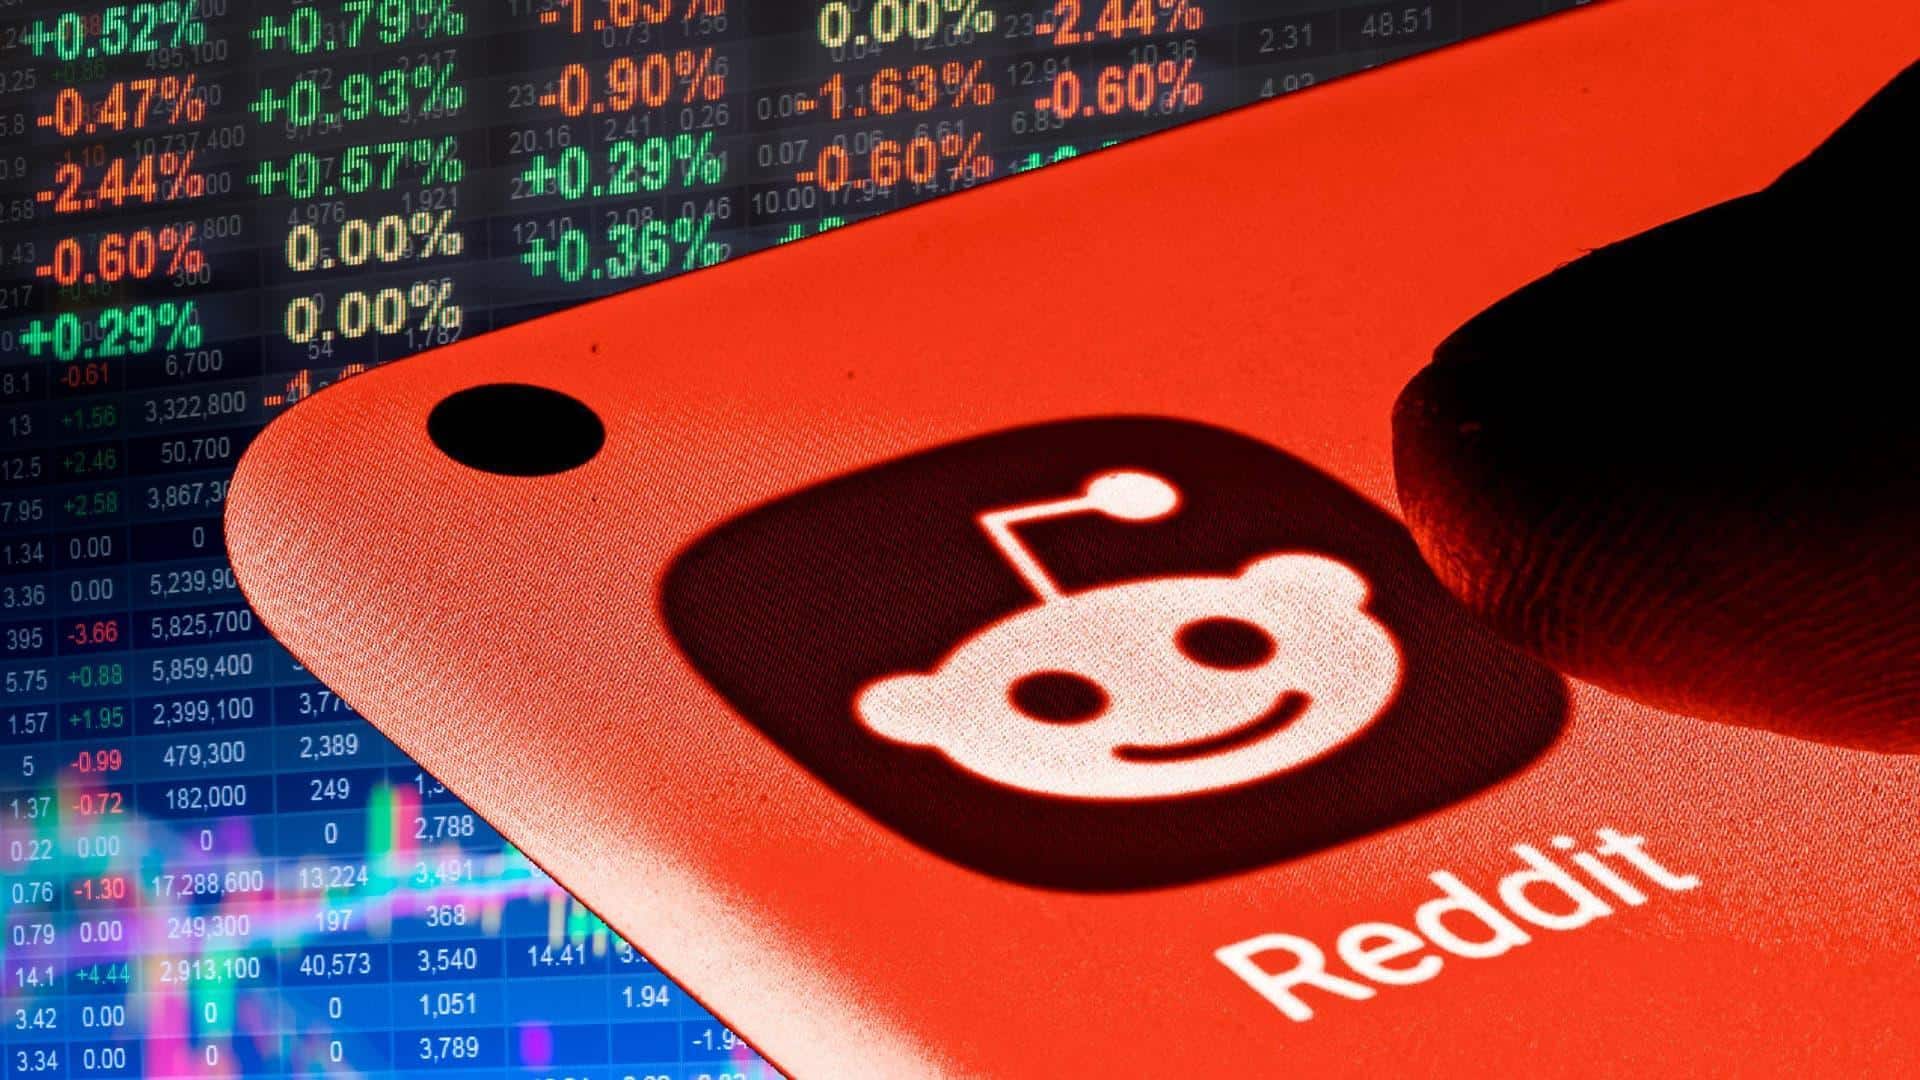 Reddit plans IPO in March, to sell 10% stocks